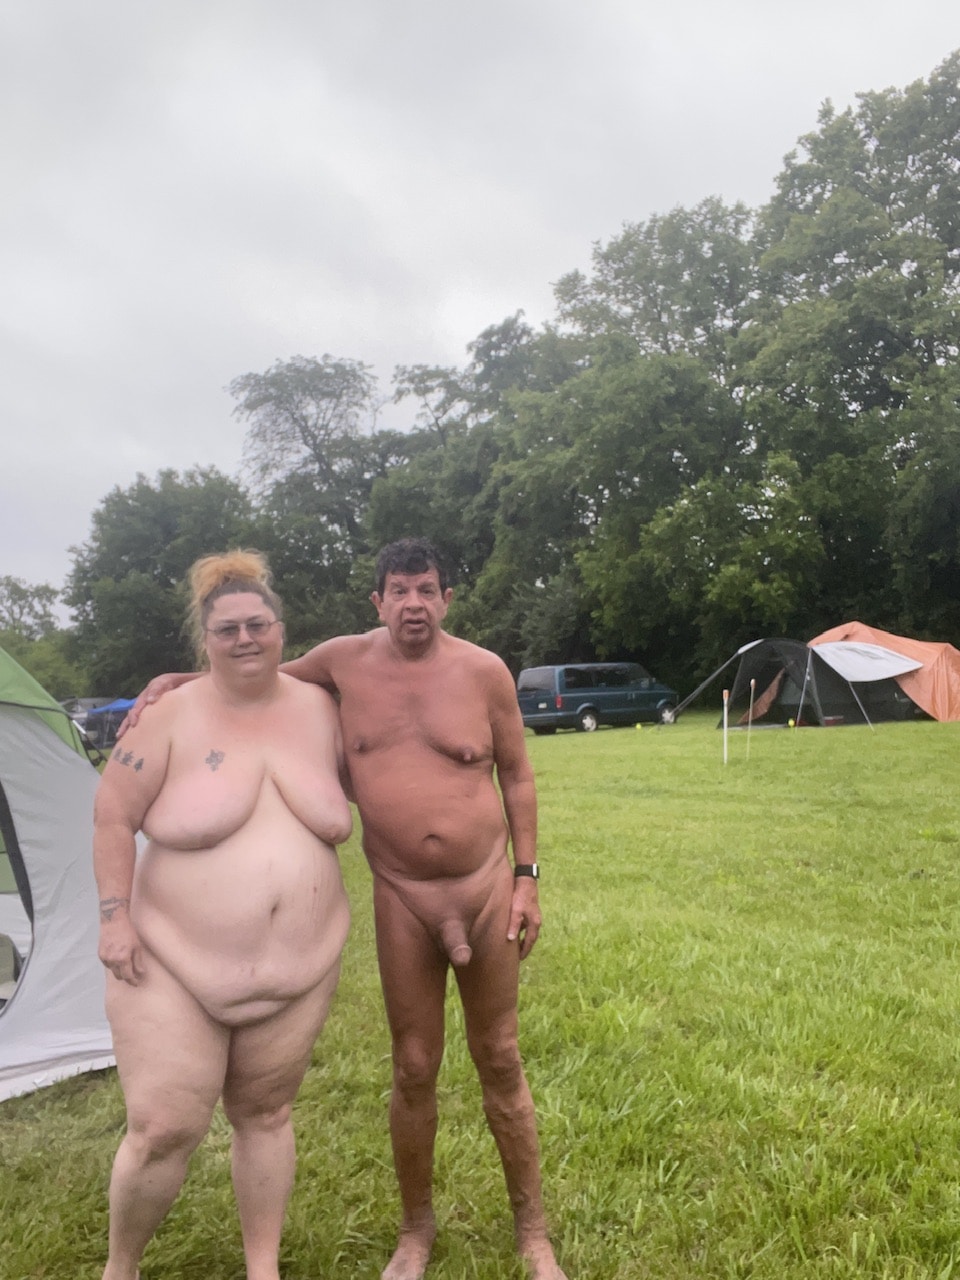 camping dares - We love camping in the nude - Real Amateurs